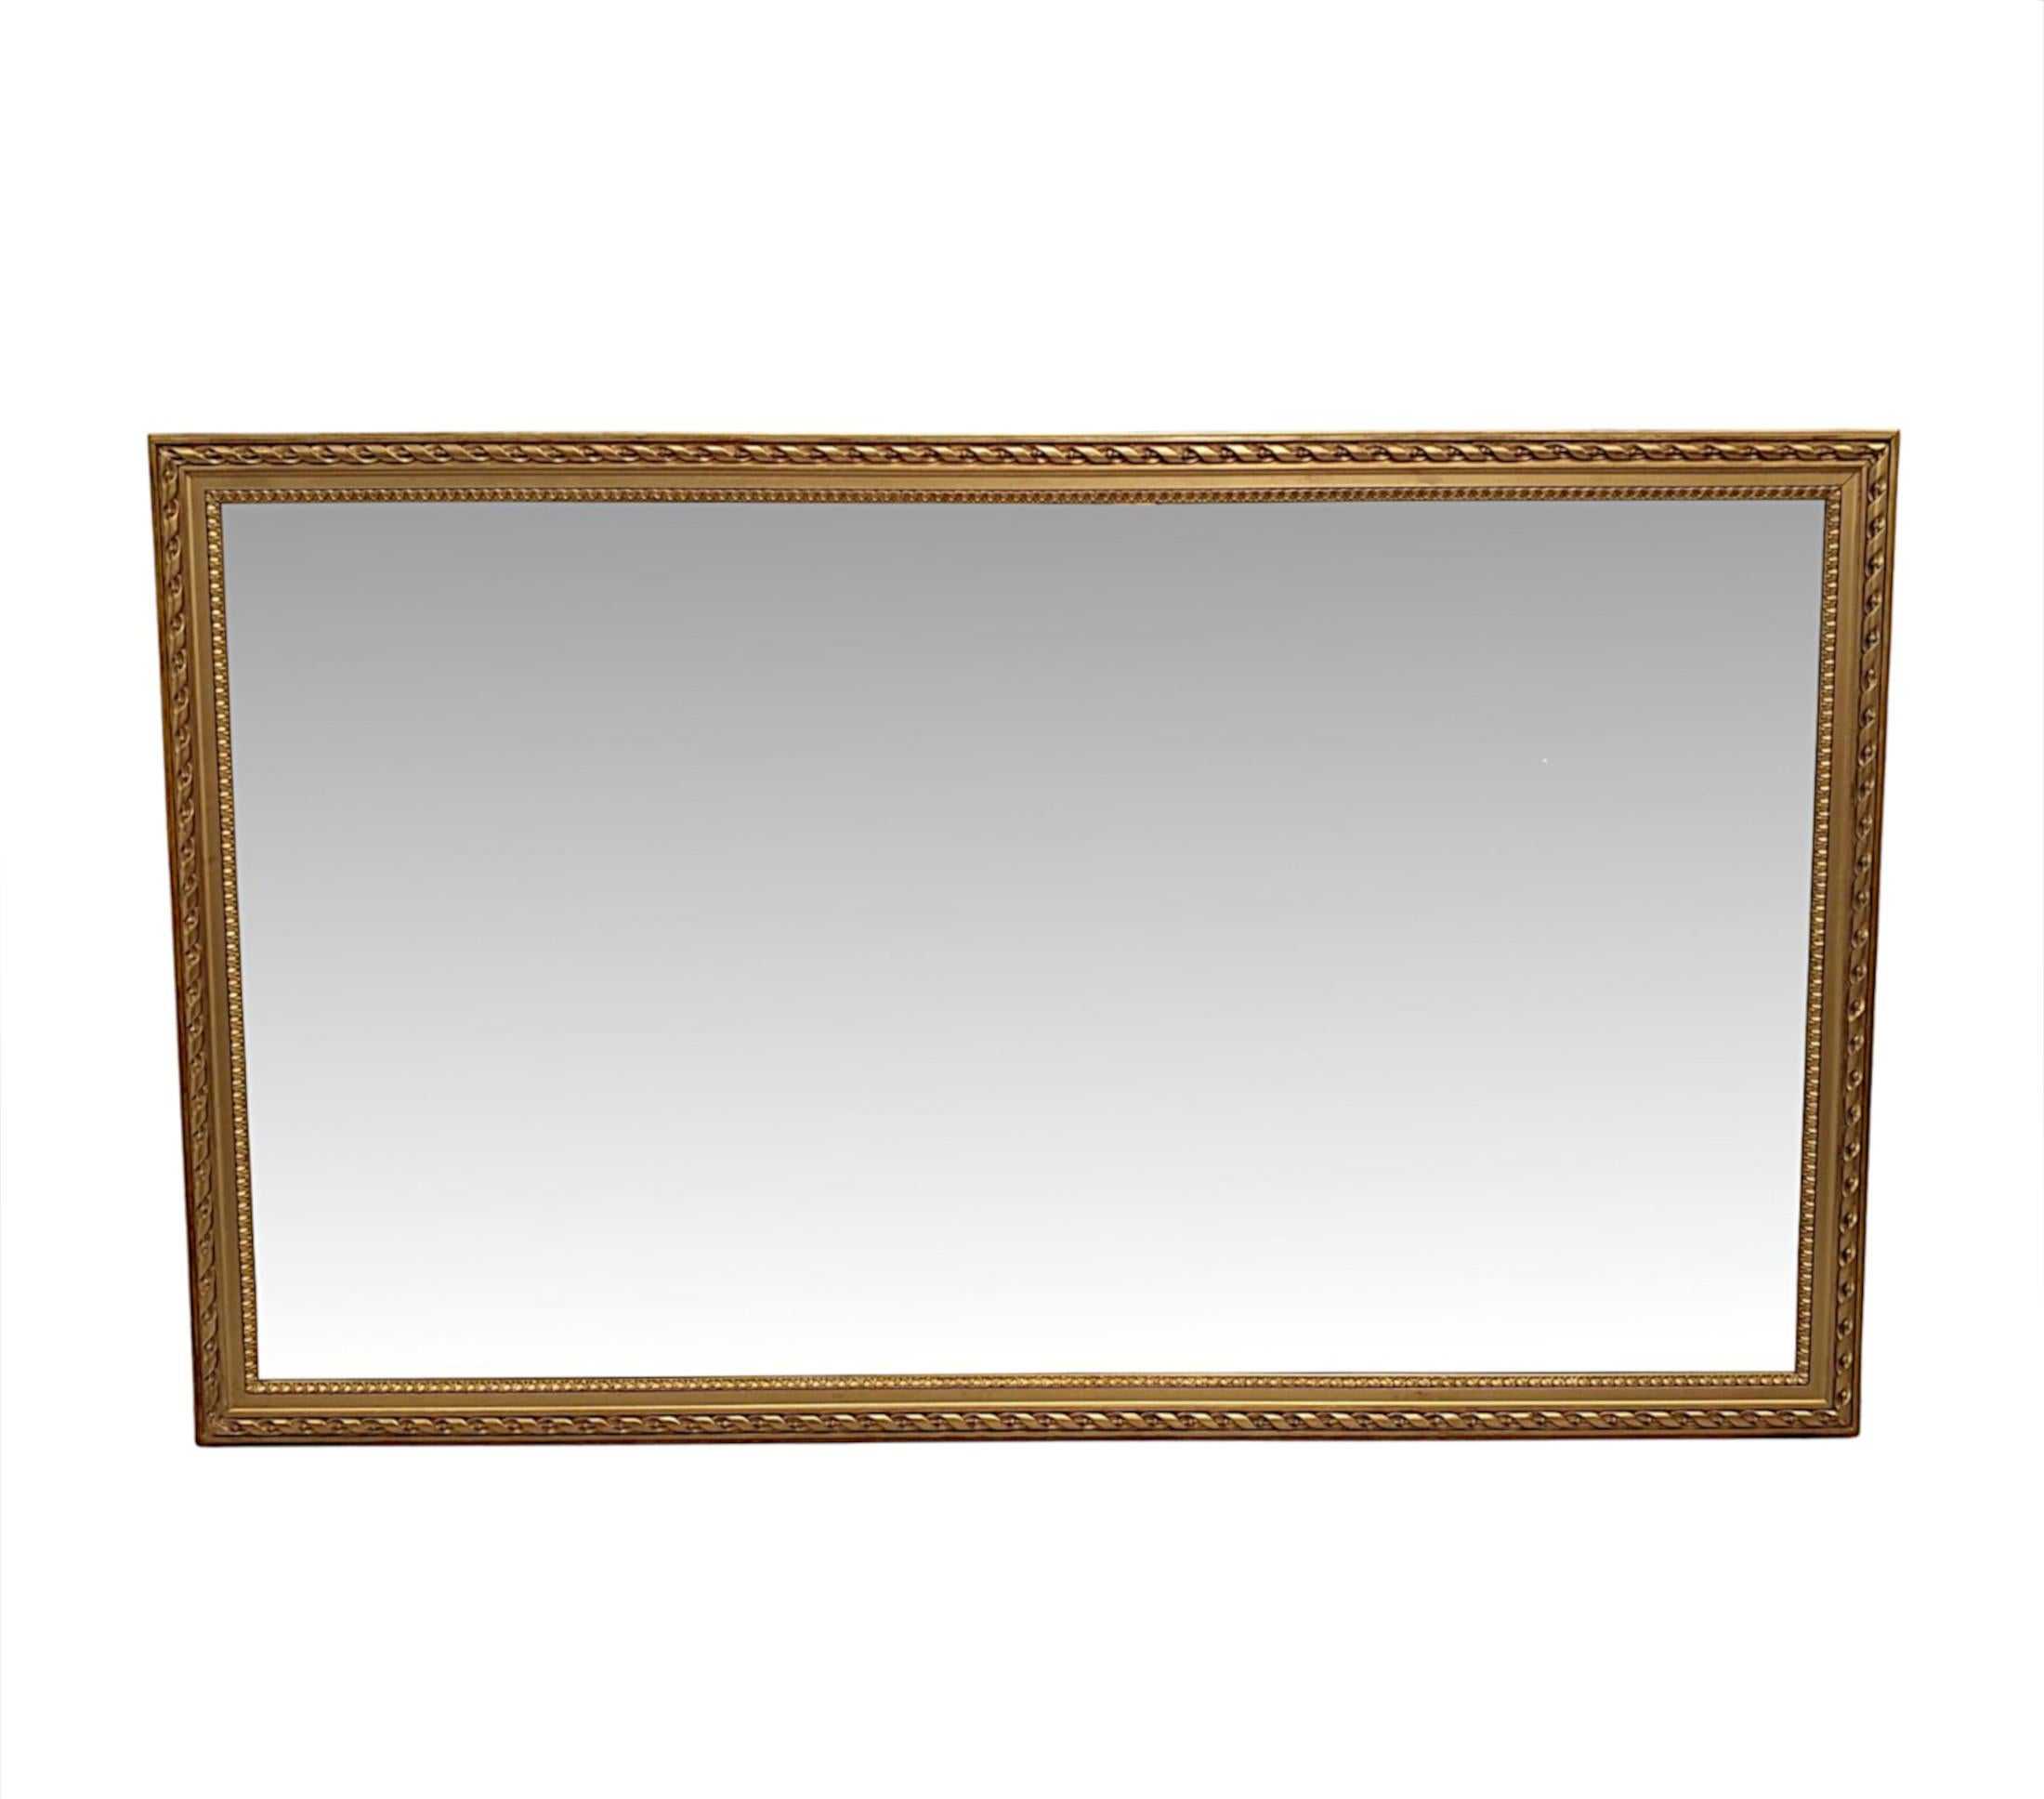 A very fine and elegant 19th century overmantle or hall mirror of exceptional quality and large proportions. The original bevelled mirror glass plate of rectangular form is set within a fabulously hand carved, moulded giltwood frame with gorgeous